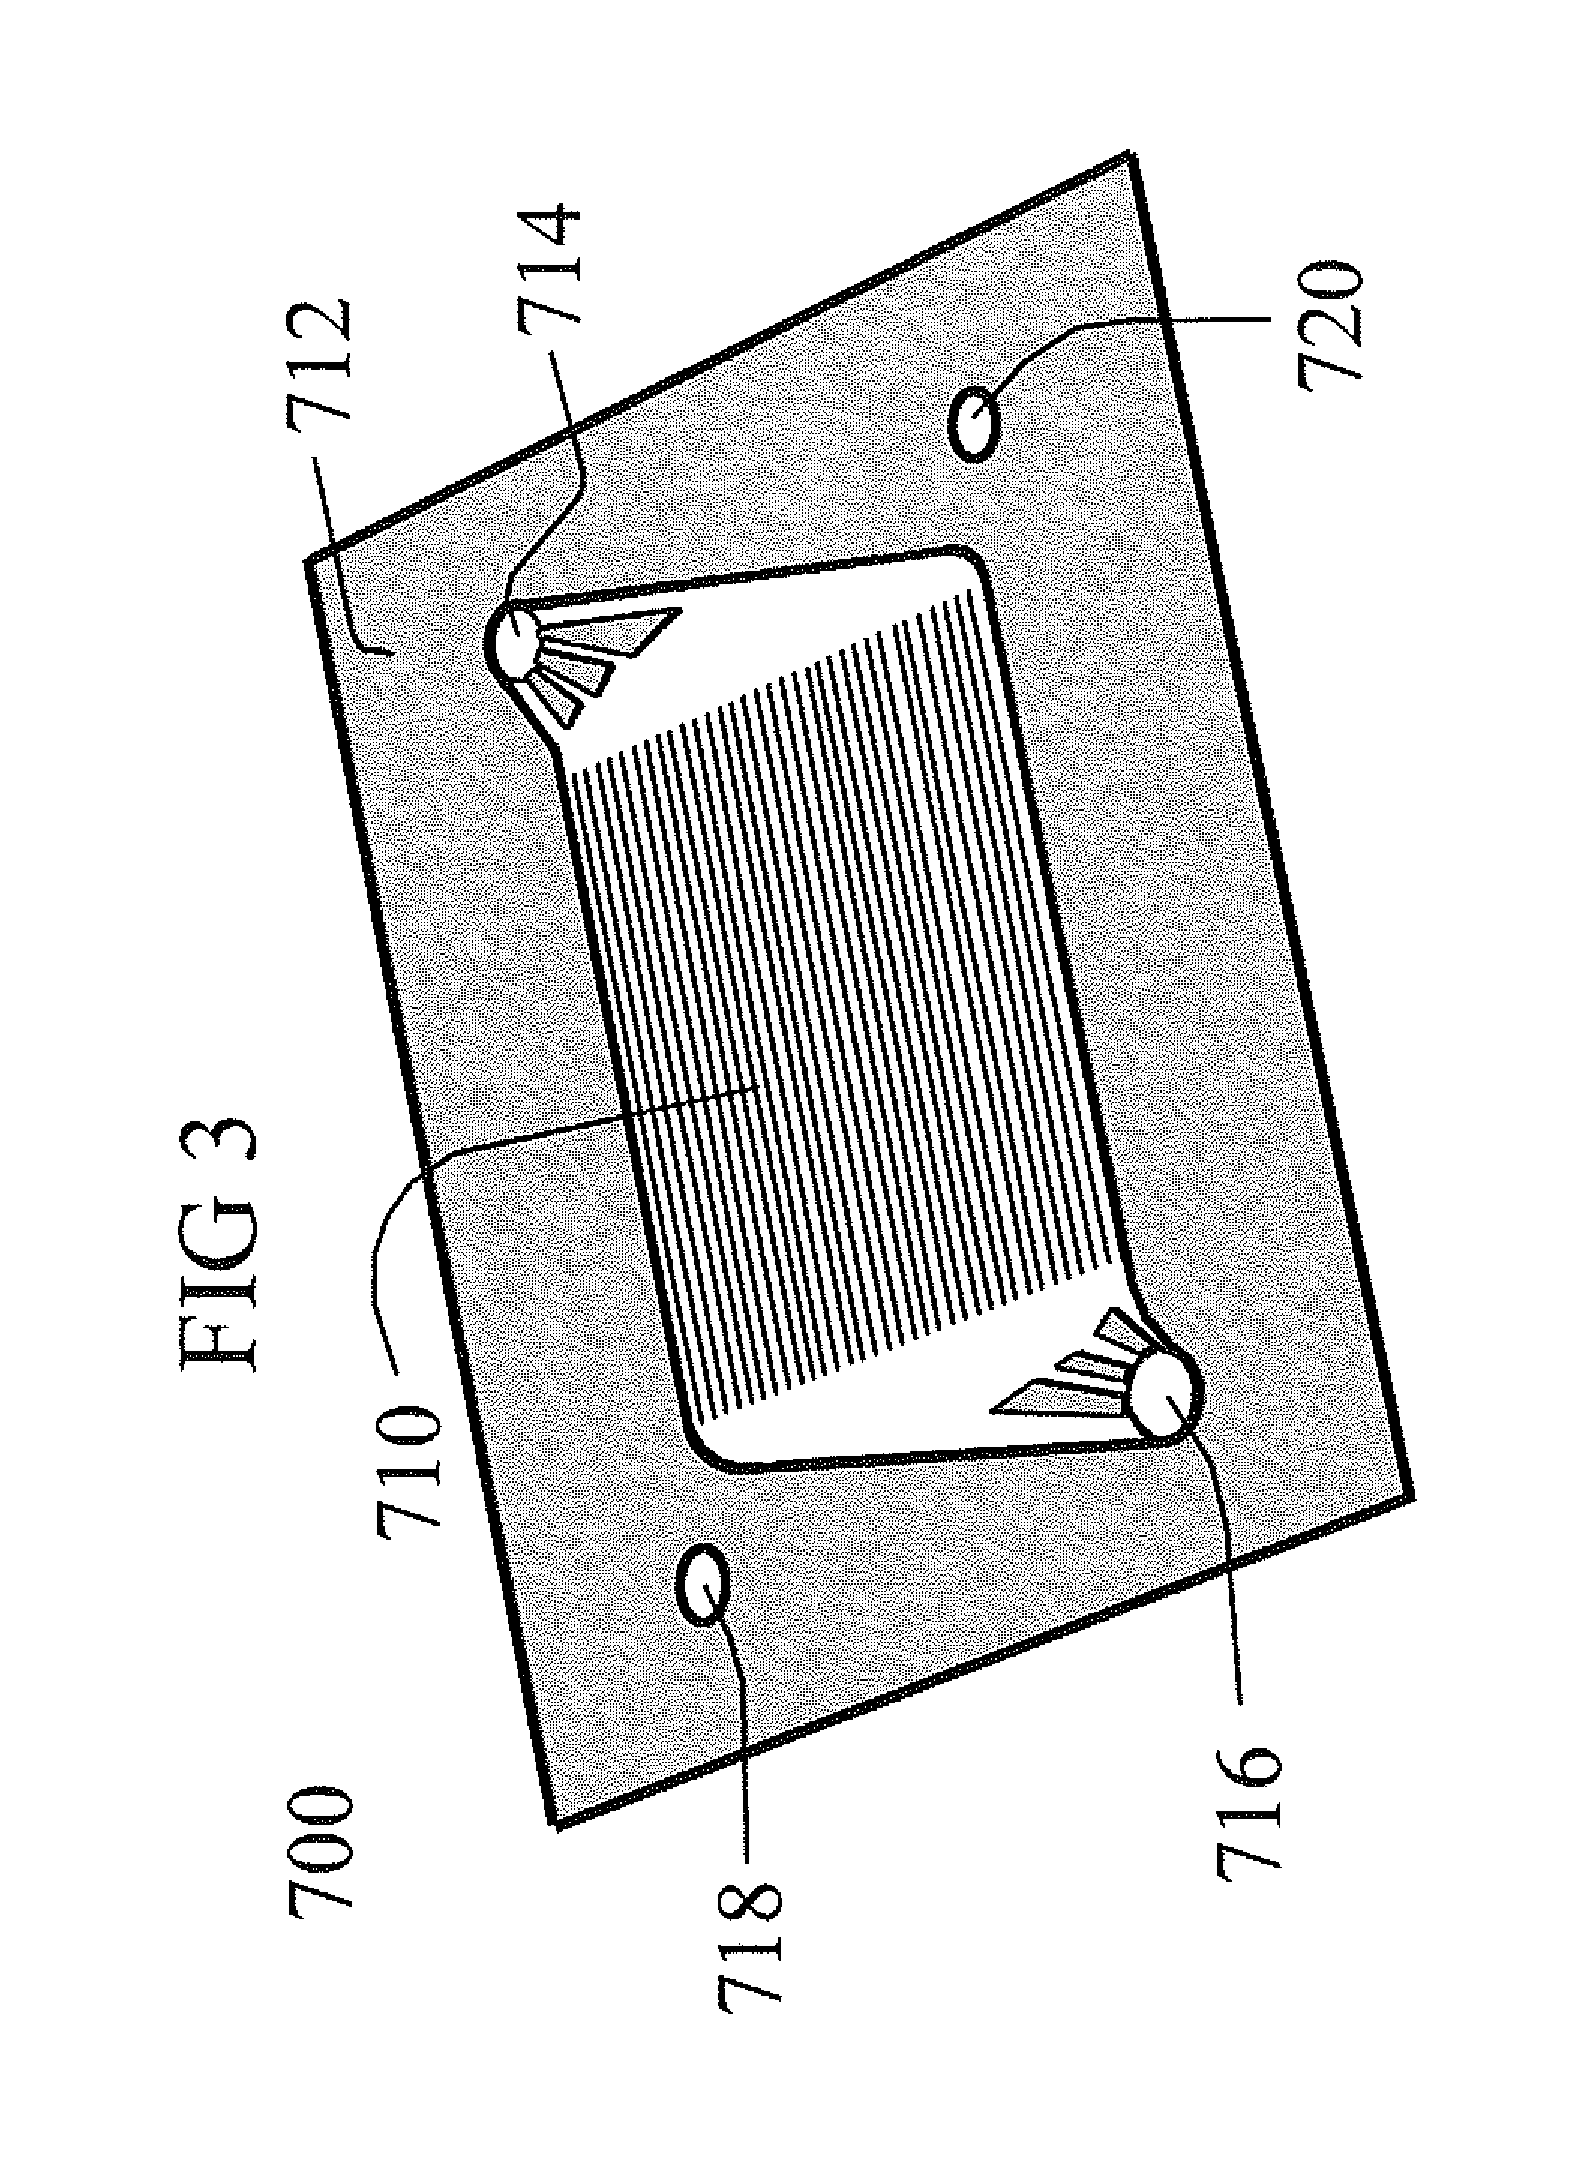 Process for toluene and methane coupling in a microreactor